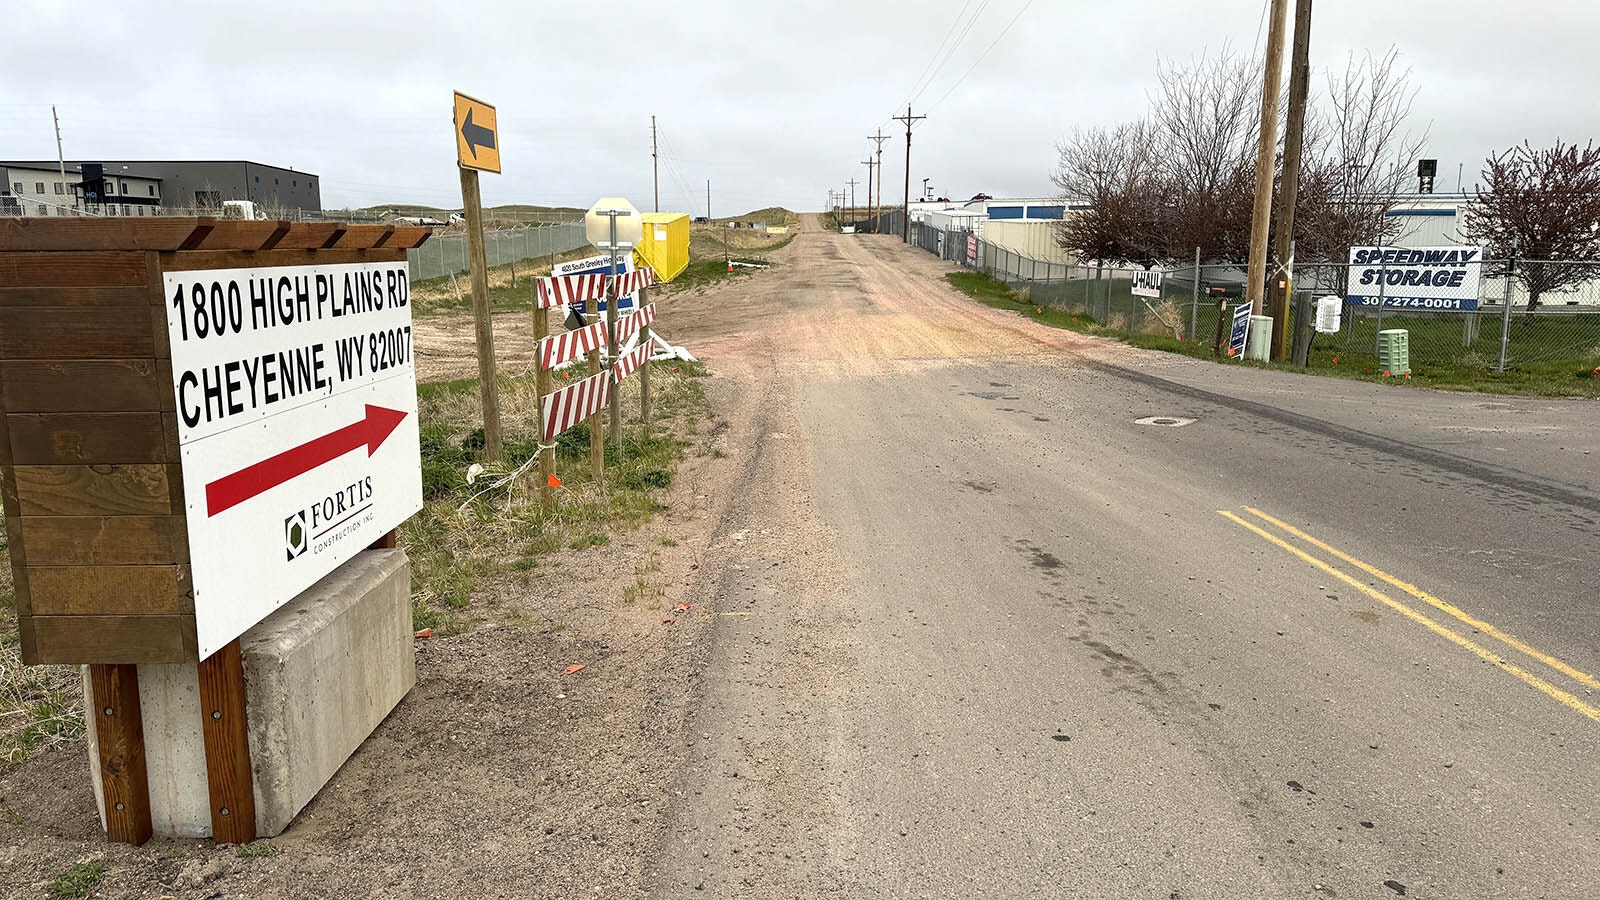 With last year’s permanent closing of the Intermountain Speedway in South Cheyenne, the road to the High Plains Business Park where the Meta enterprise data center is being built was recently renamed the High Plains Road. (